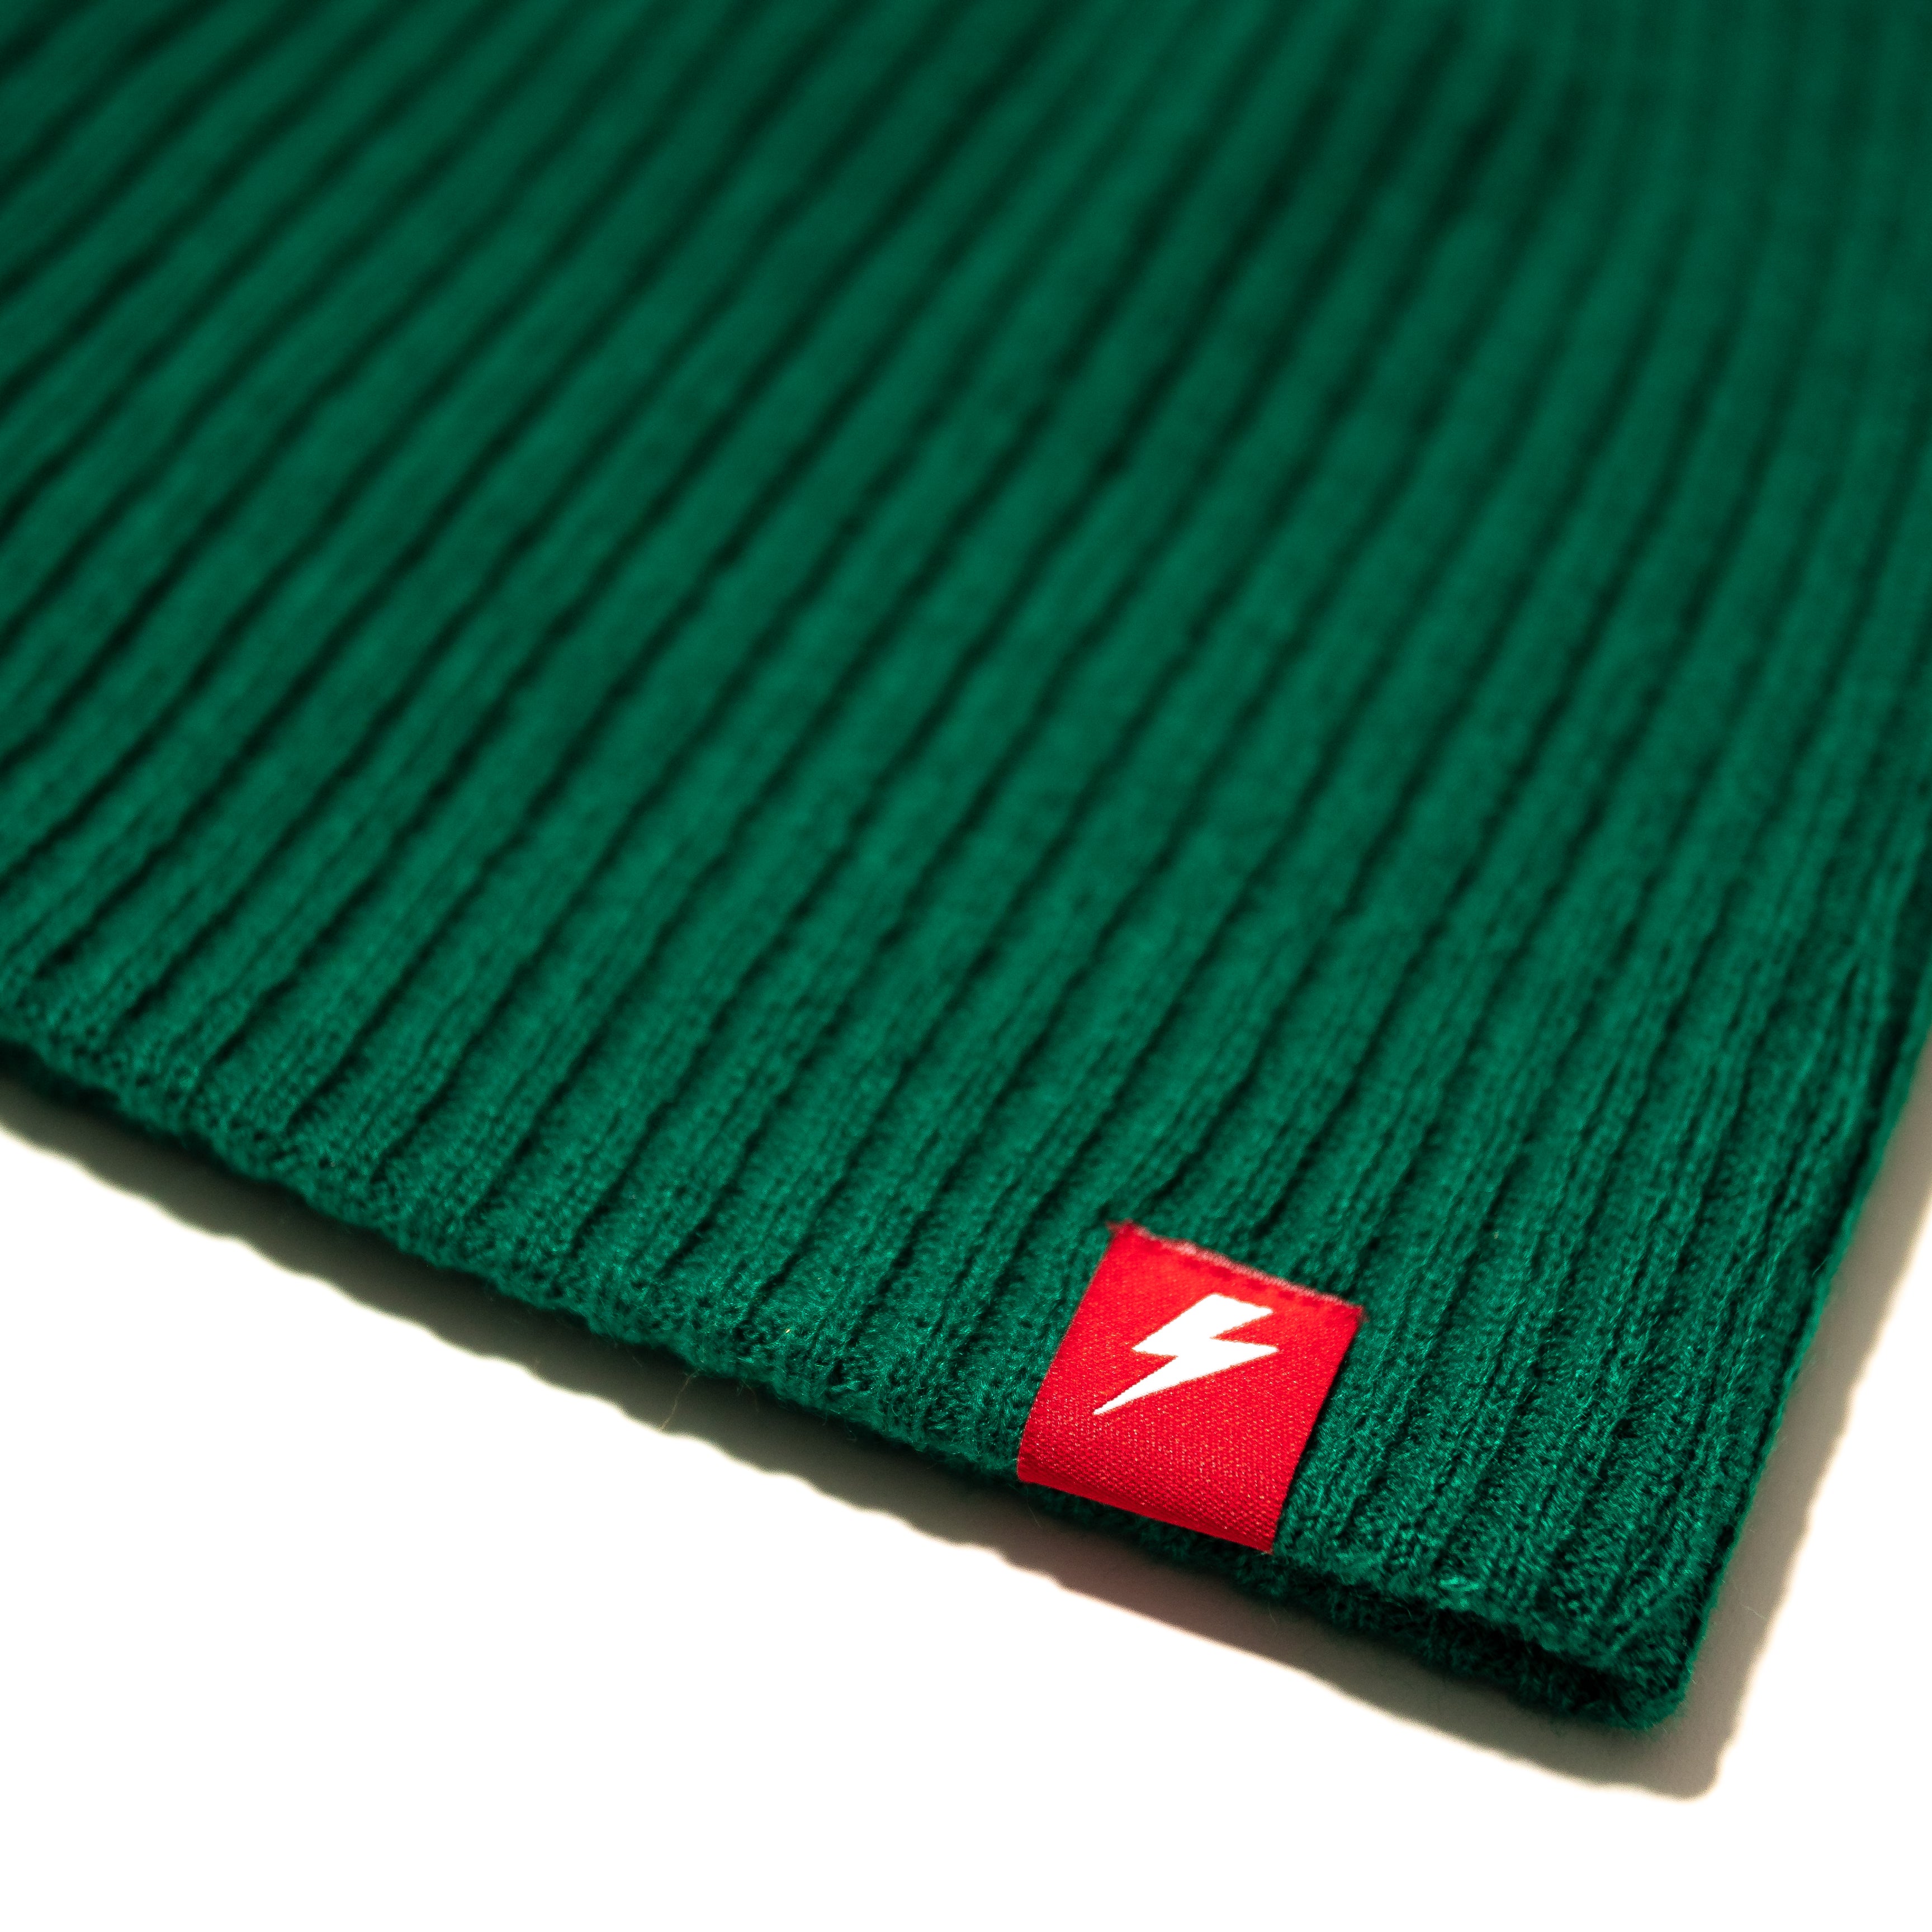 Bolt Beanie - Two in One